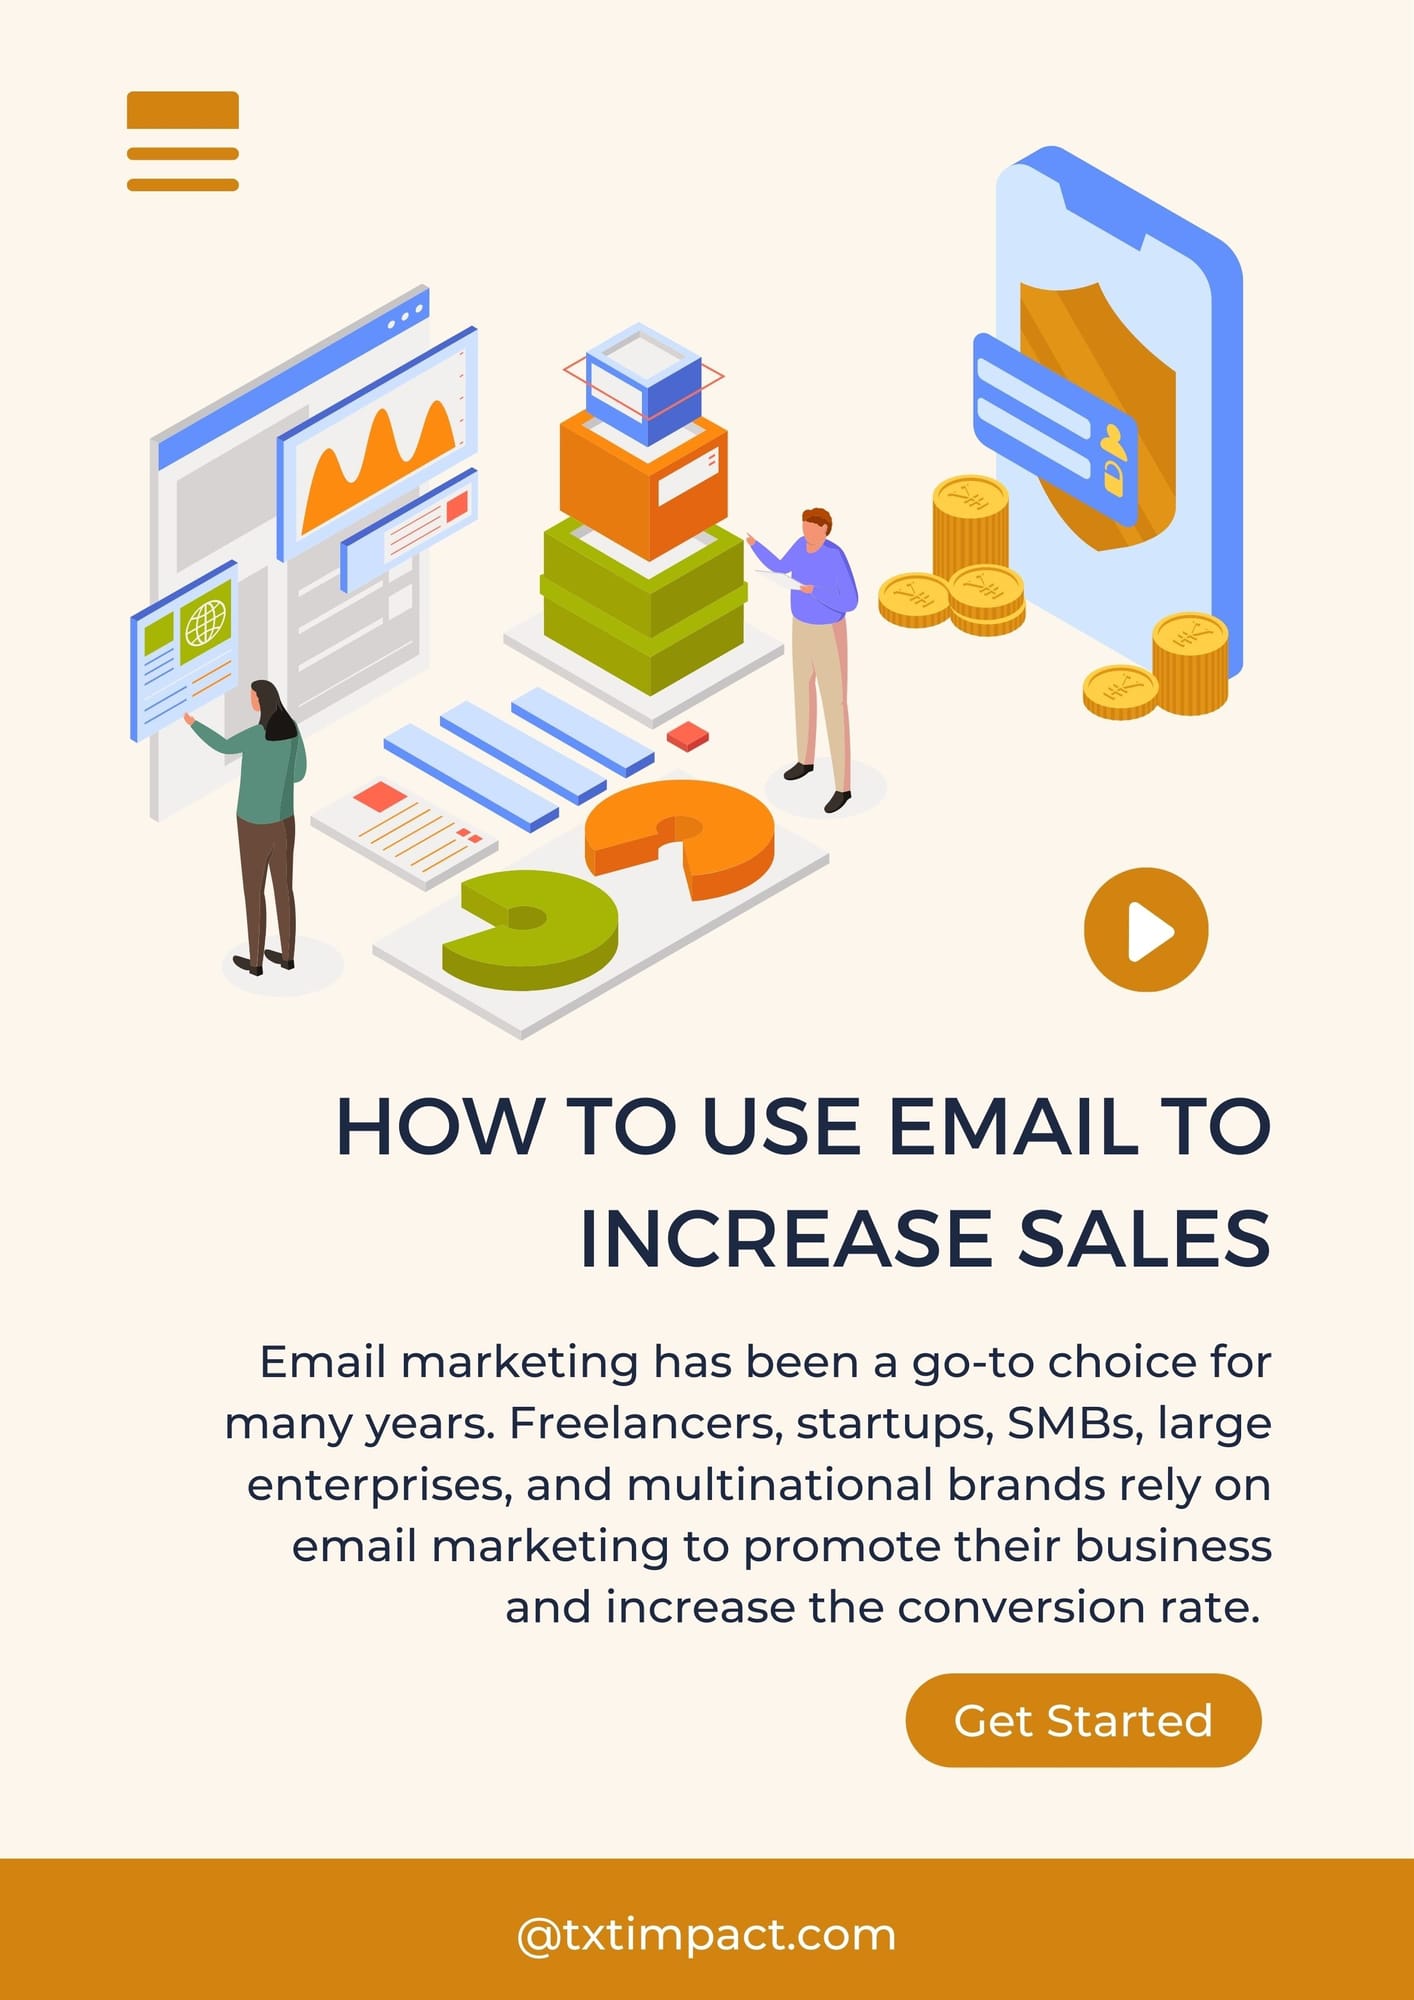 How to Use Email to Increase Sales.jpg